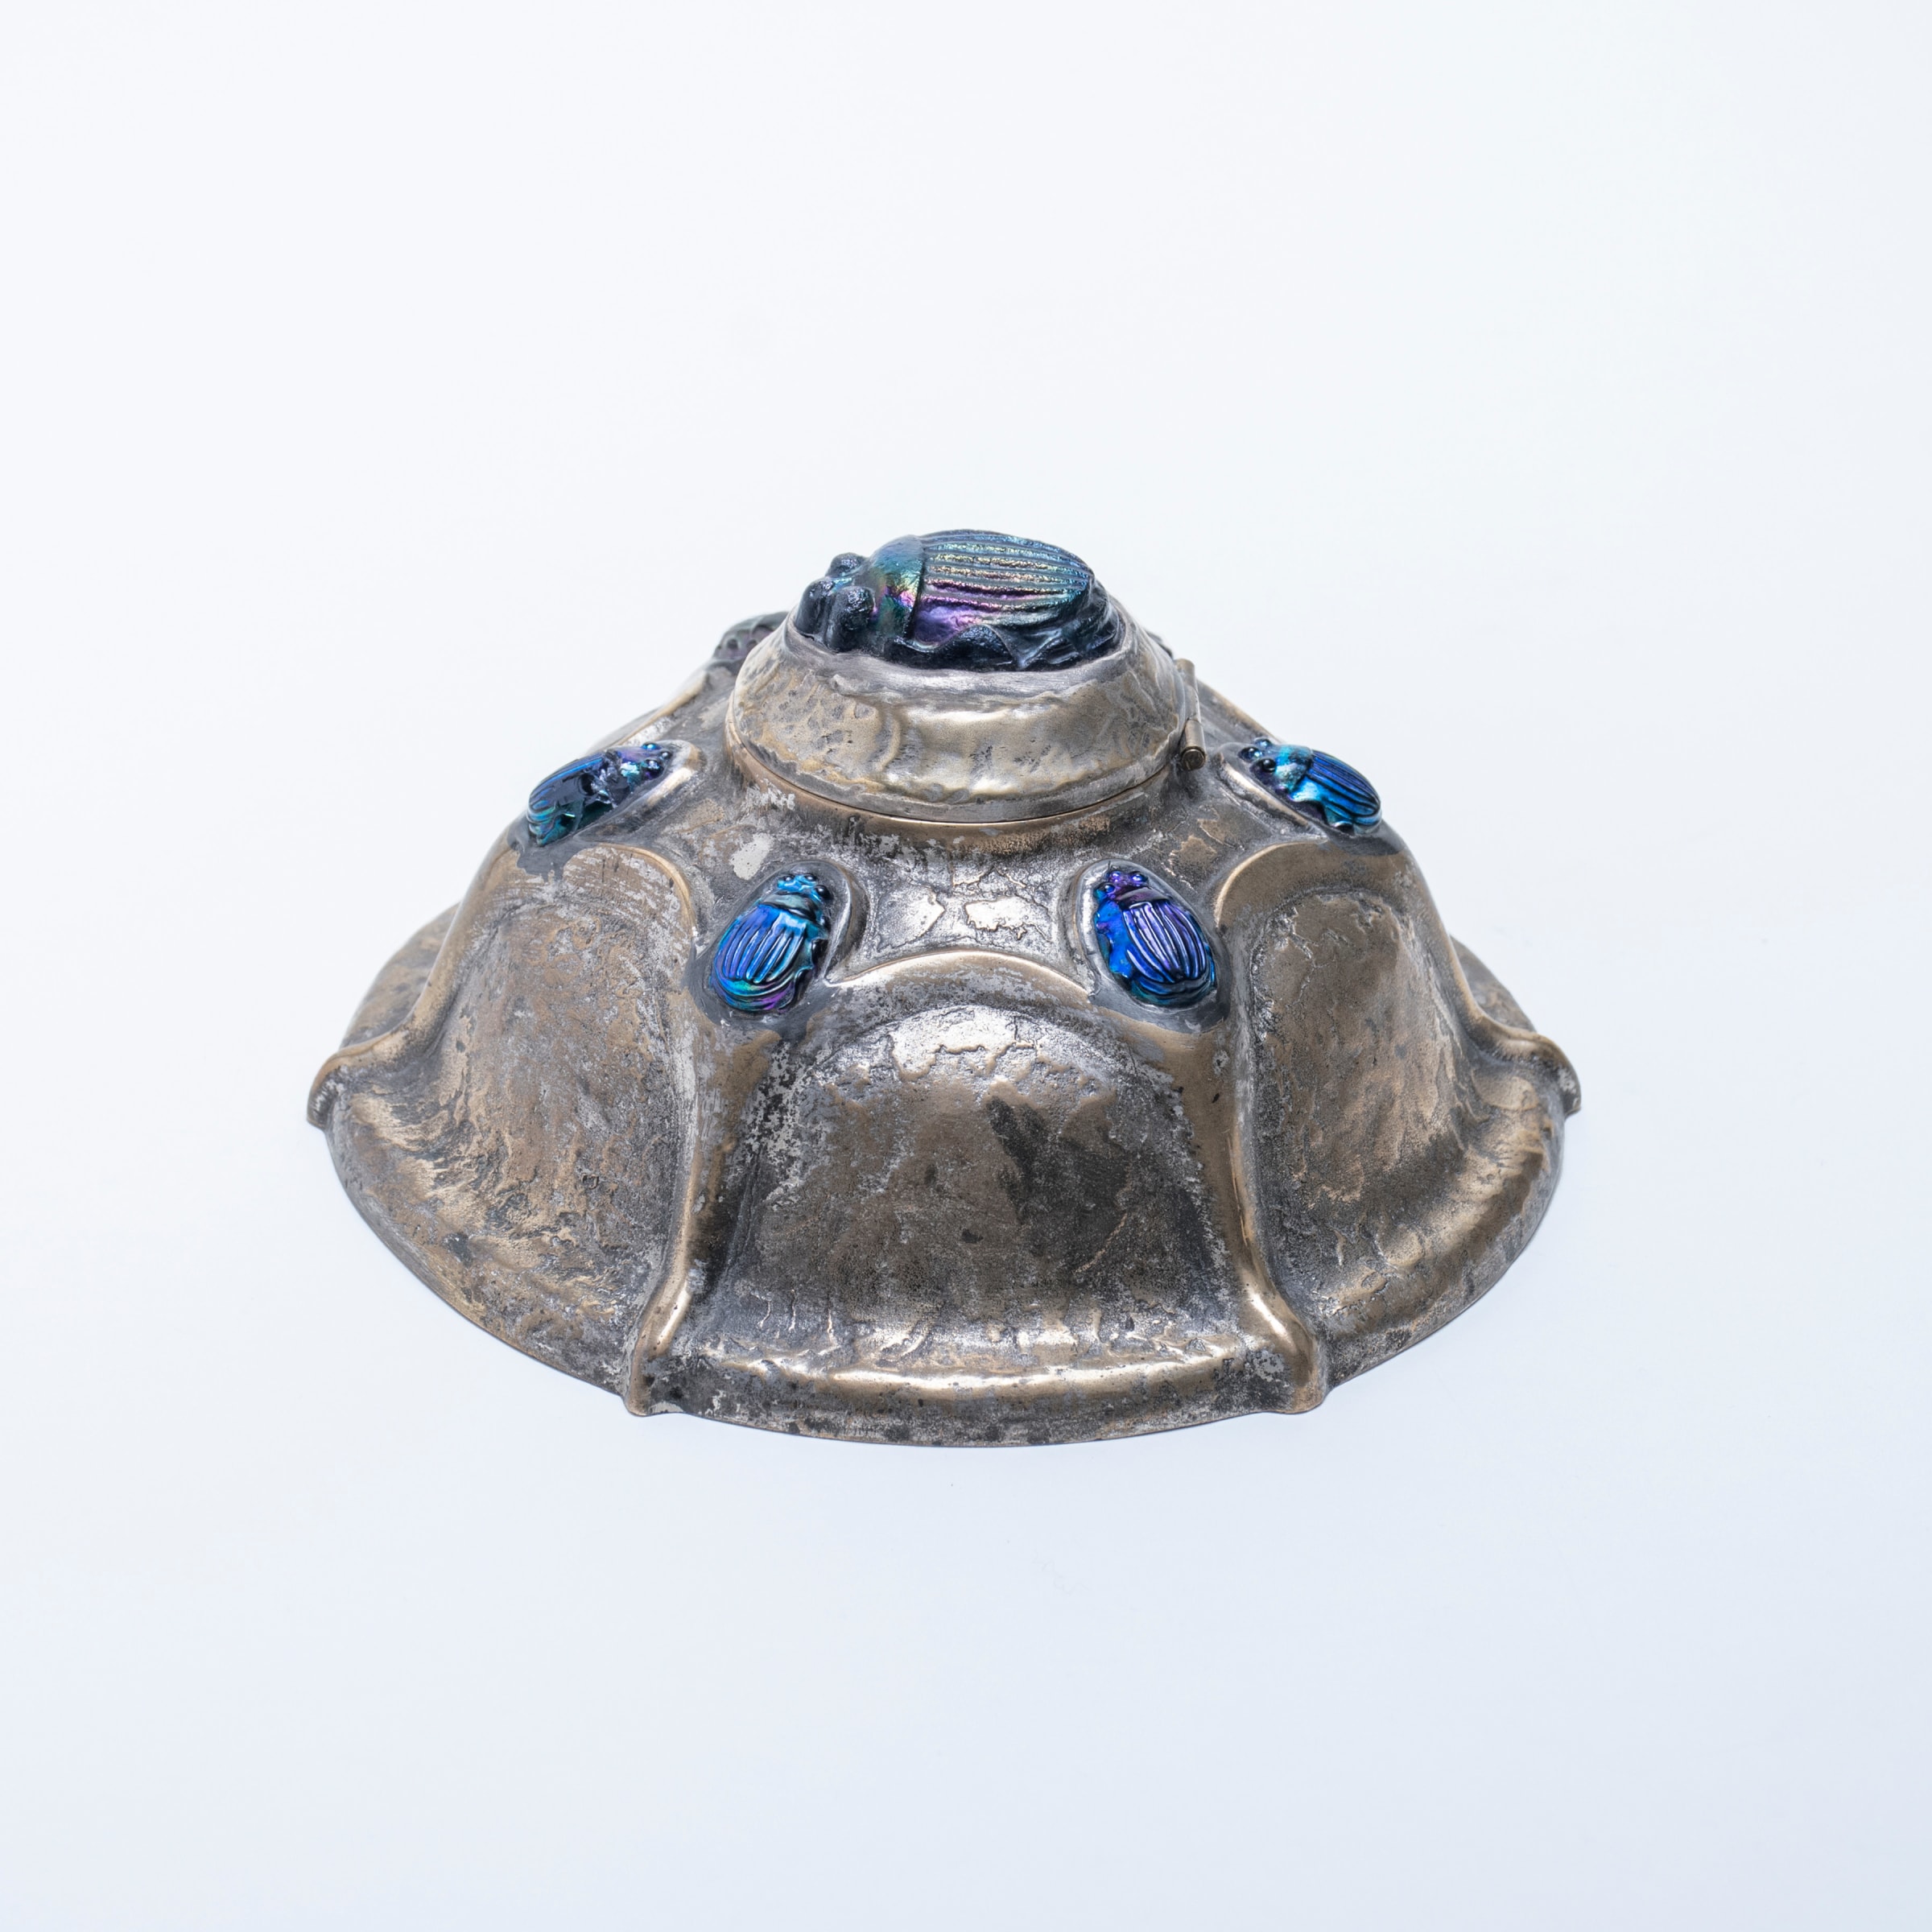 an inkwell by tiffany studios in sterling silver, with irregular surface texture, the hinged top with a large blue iridescent favrile glass pressed scarab tile with rainbow iridescence, with a series of smaller matching tiffany glass scarabs on the domed body of the inkwell.